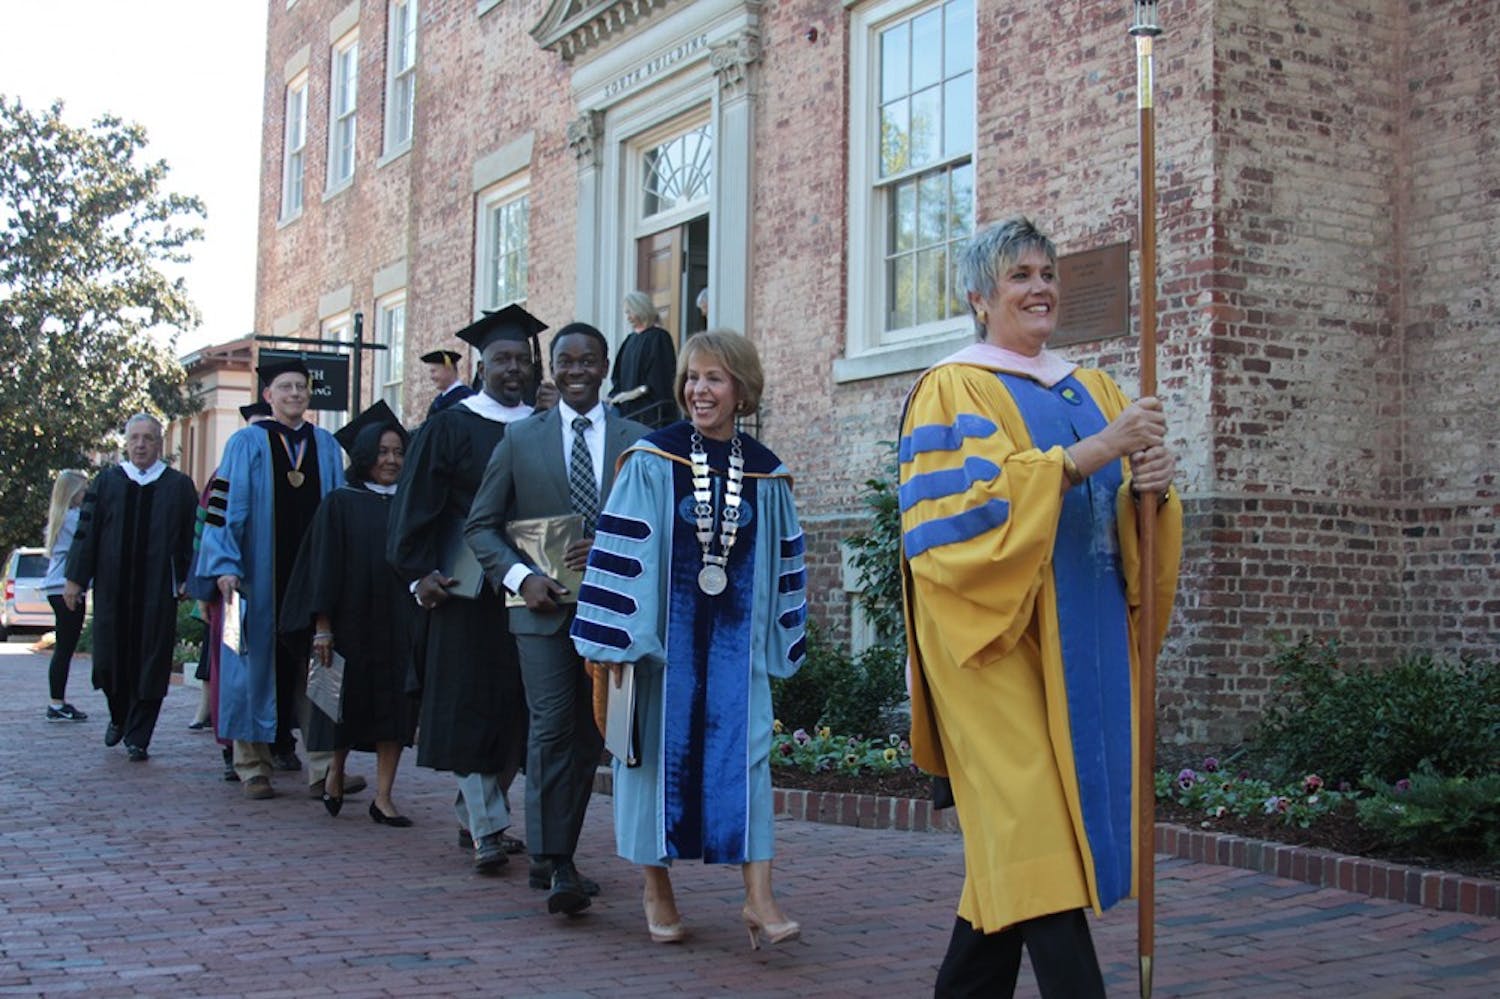 The University Day procession, including Chancellor Carol Folt and Student Body President Bradley Opere, makes its way from South Building to Memorial Hall.